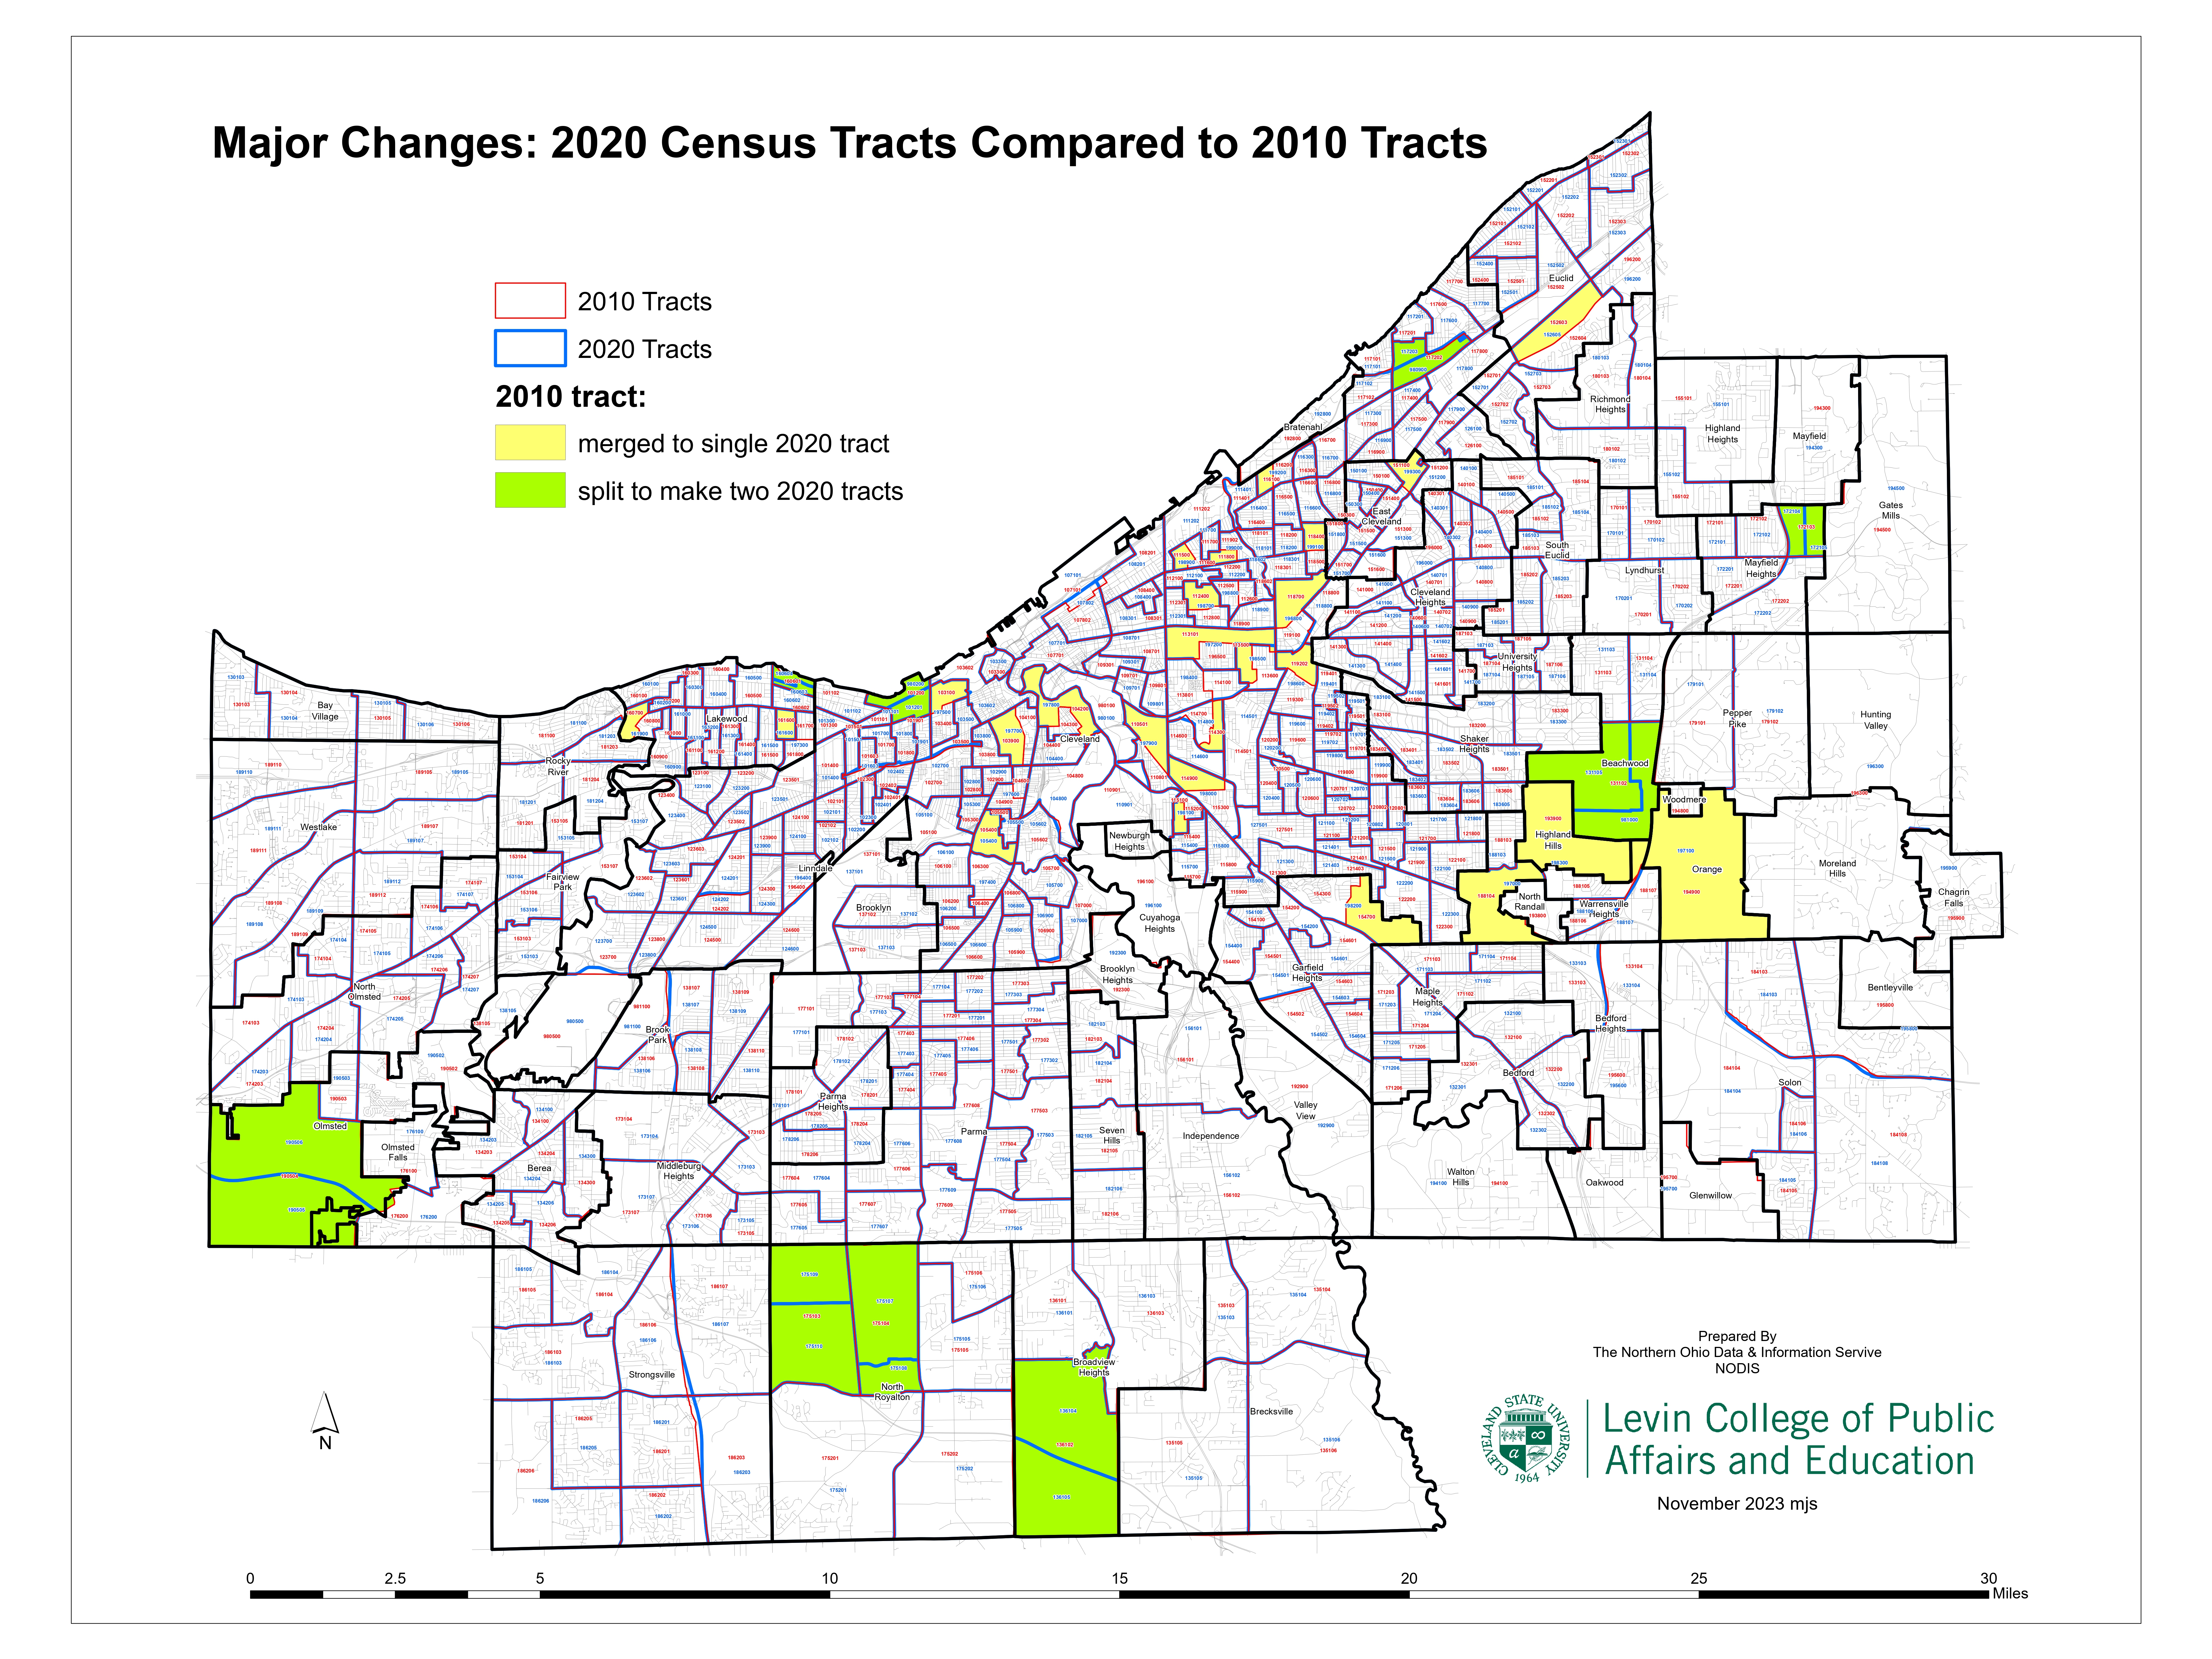 Major Changes - 2020 Census Tracts Compared to 2010 Tracts